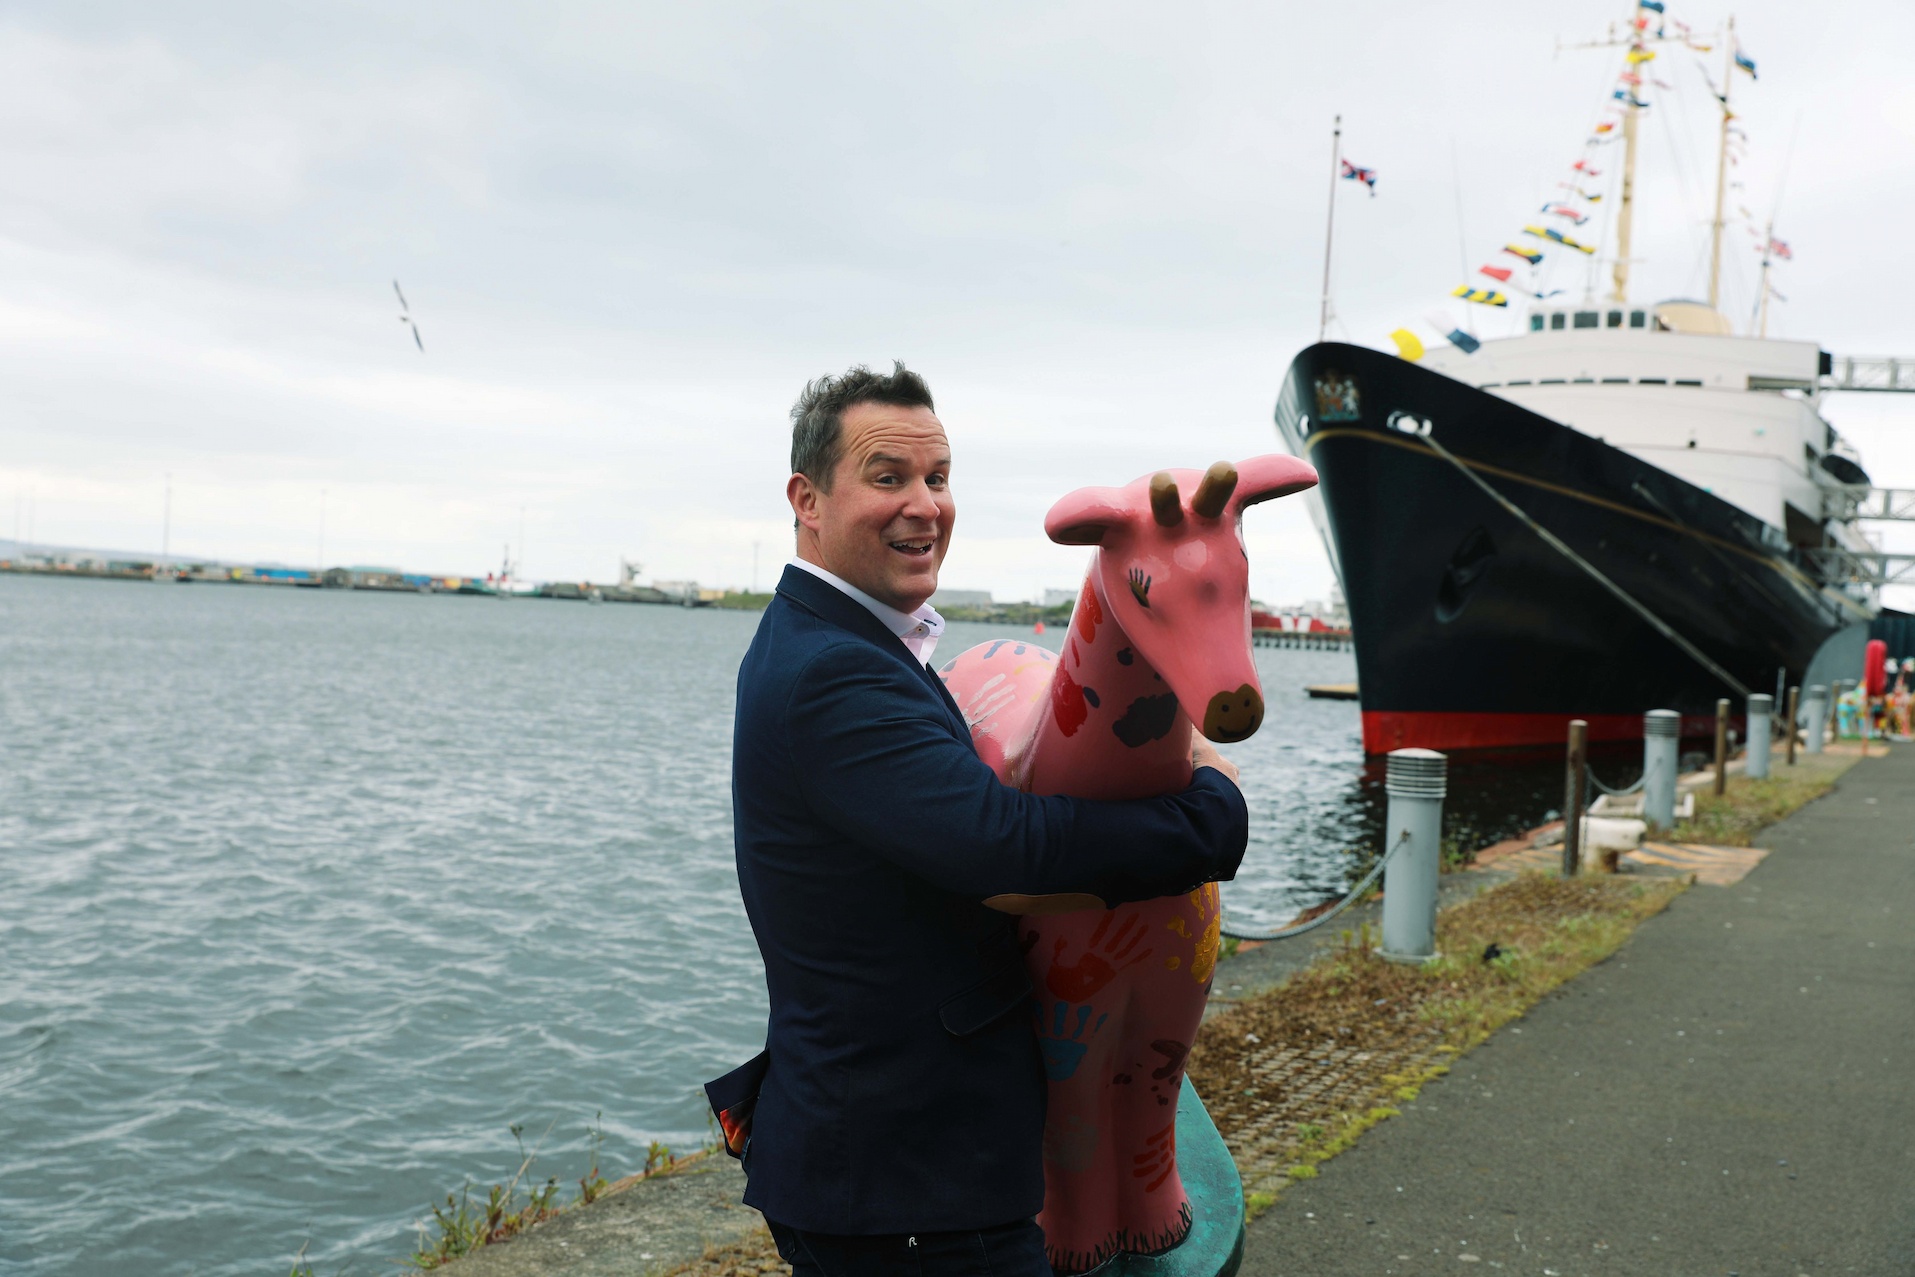 Paul Wakefield City Fibre city manager carrying pink giraffe about town statue near Royal Yacht Britannia

Image: JASMINE GEDDES 2022